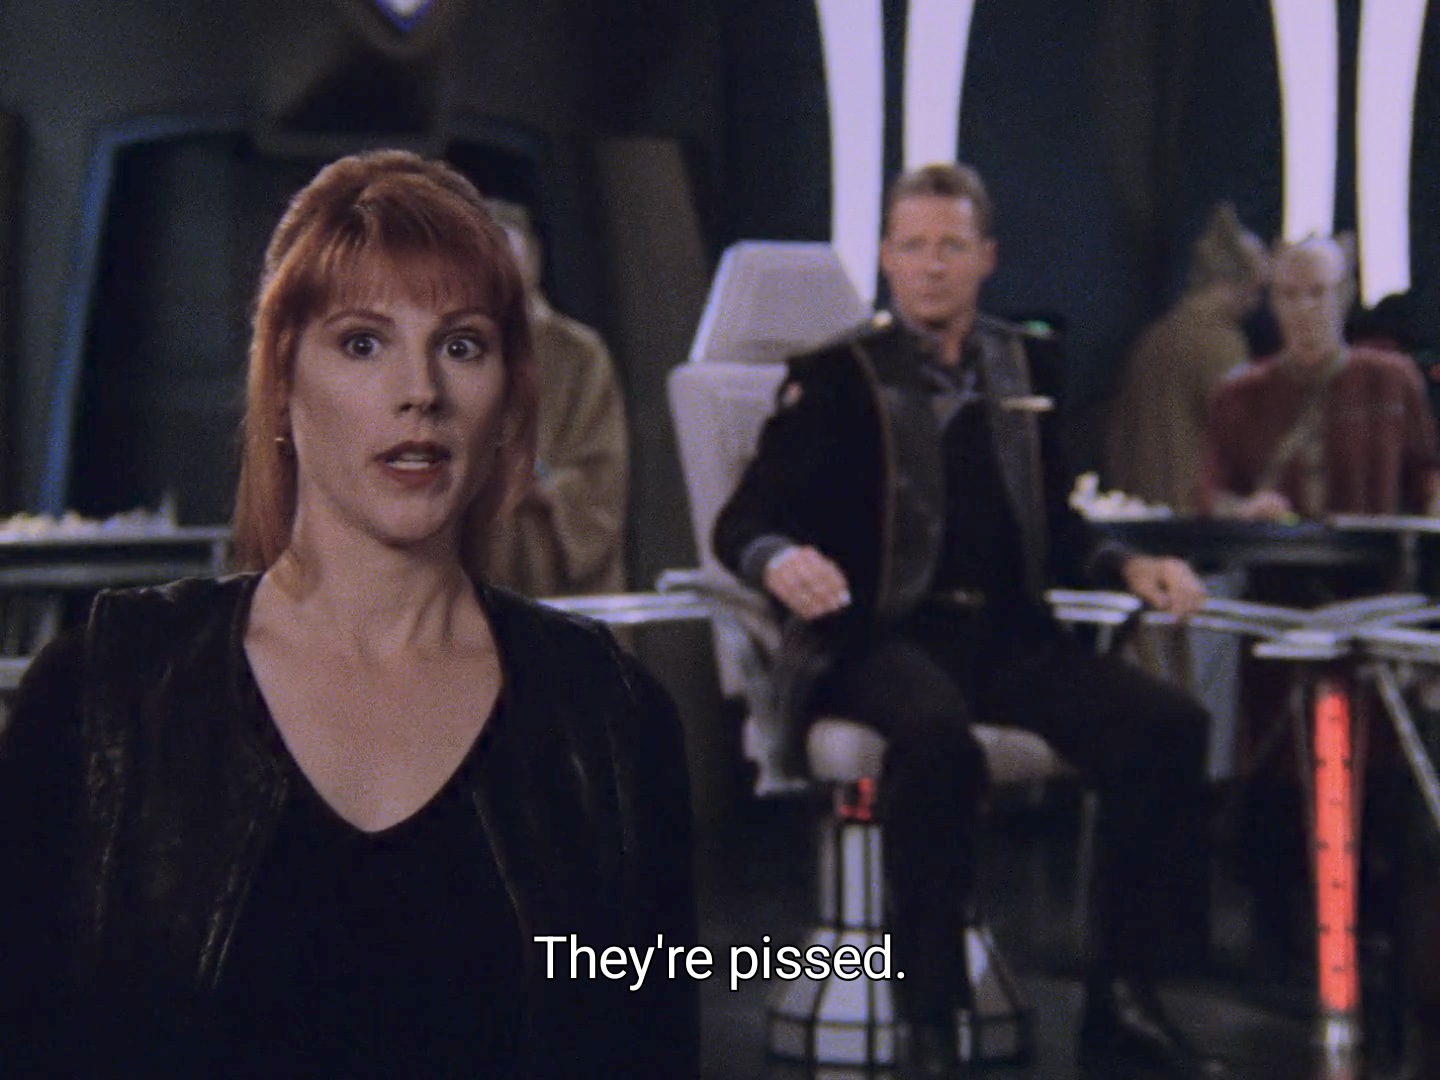 Picture of the bridge of the White Star. To the left, in the foreground, is Lyta Alexander. Near the center, in the middle distance, is Sheridan, sitting in the captain's chair. On the right, in the background, is Lennier.</p><p>The caption reads: "They're pissed."